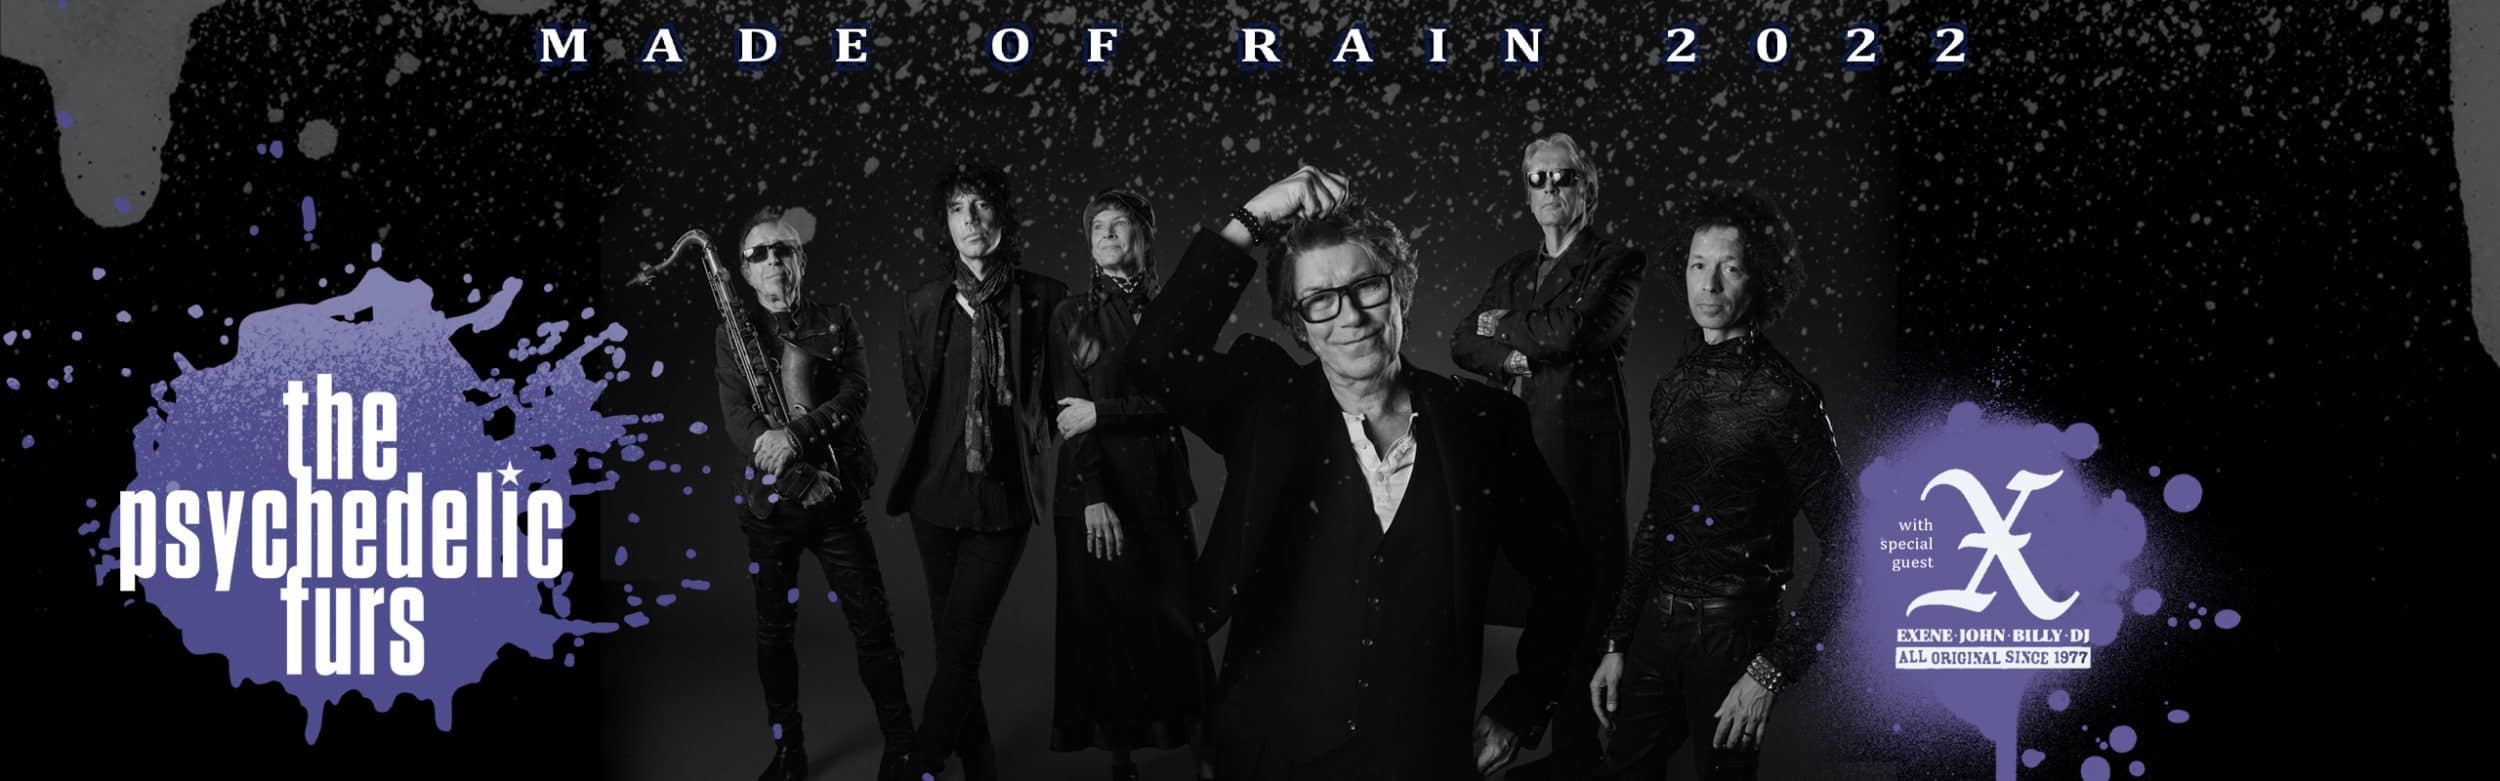 The Psychedelic Furs: Made of Rain 2022 Tour with Special Guests X